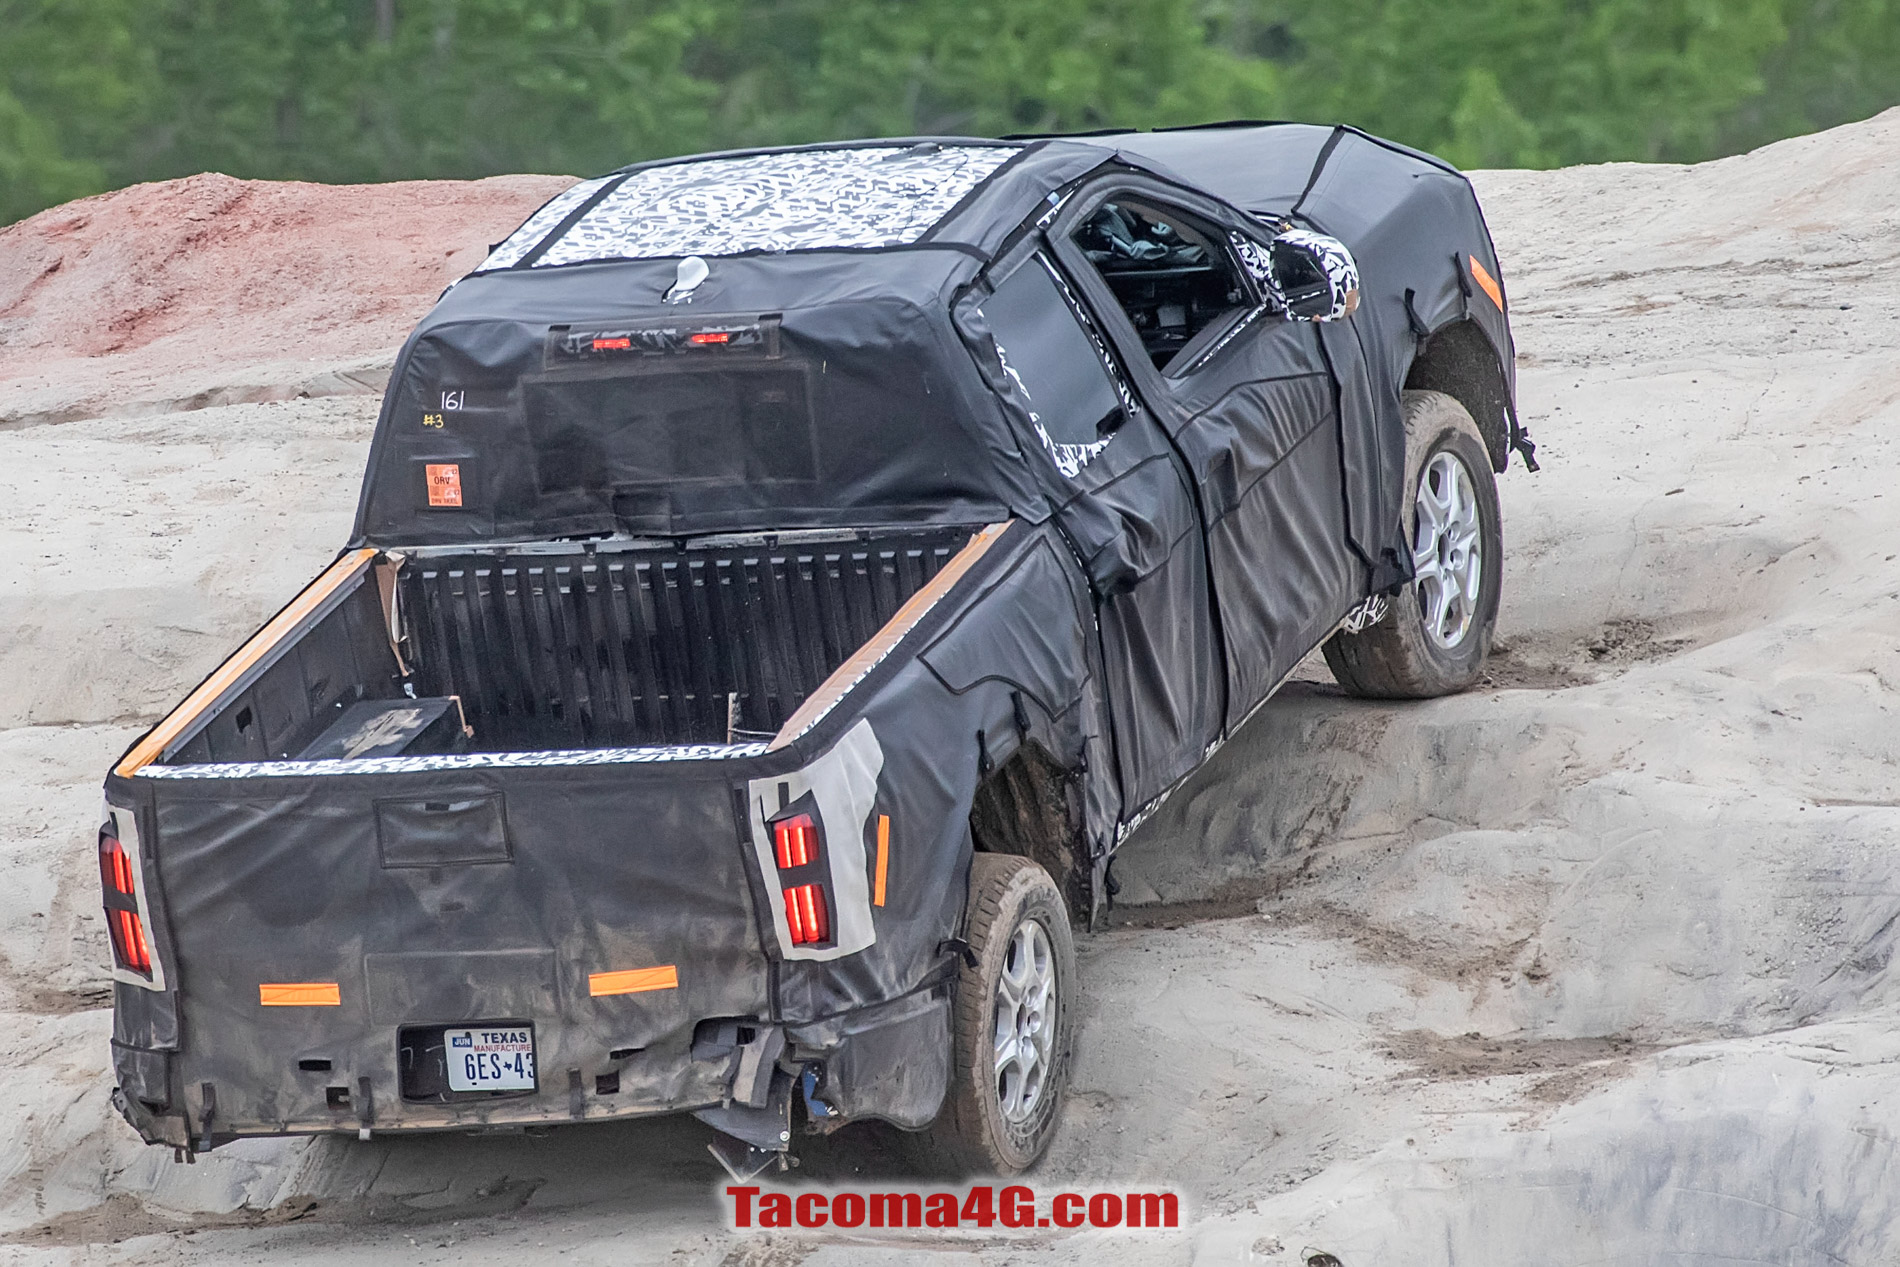 2024 Tacoma New 2024 Tacoma (4th Next Gen) Mule Off-Road Testing Reveals More Suspension Details -- 5/27/22 2024 Toyota Tacoma 4th gen spy photos suspension interior 18